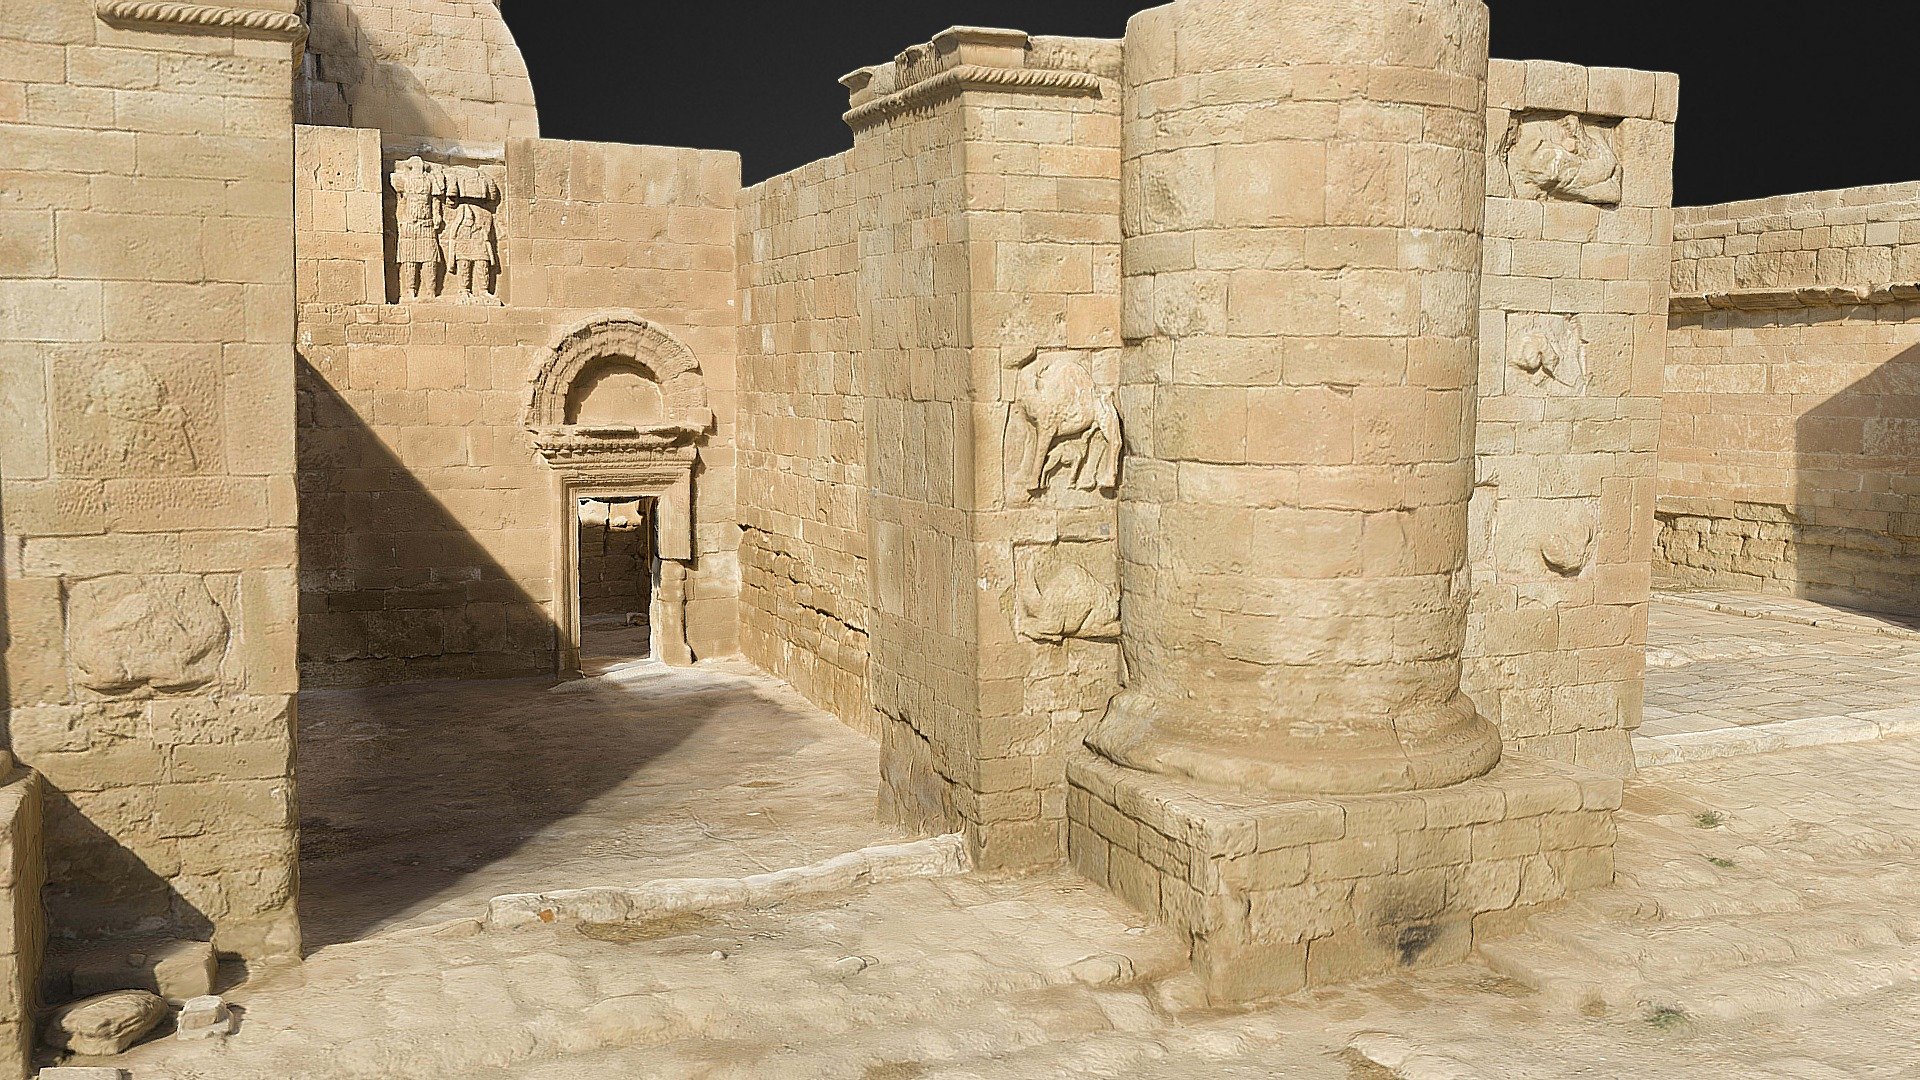 3D model of the temple of Allat in Hatra - Iraq 3d model